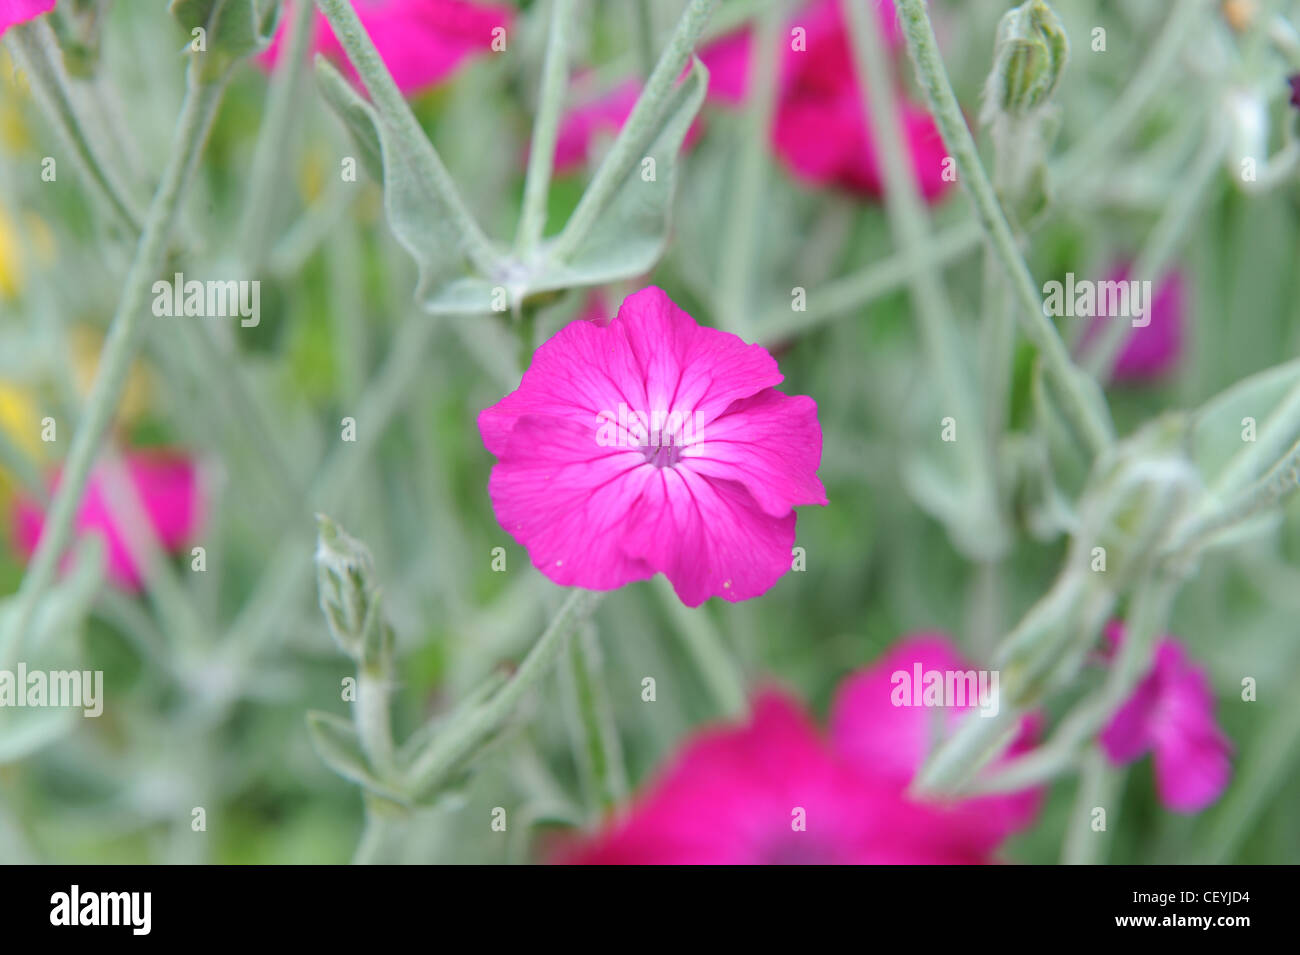 Close up image of pink Campion flower (Silene dioica) Stock Photo